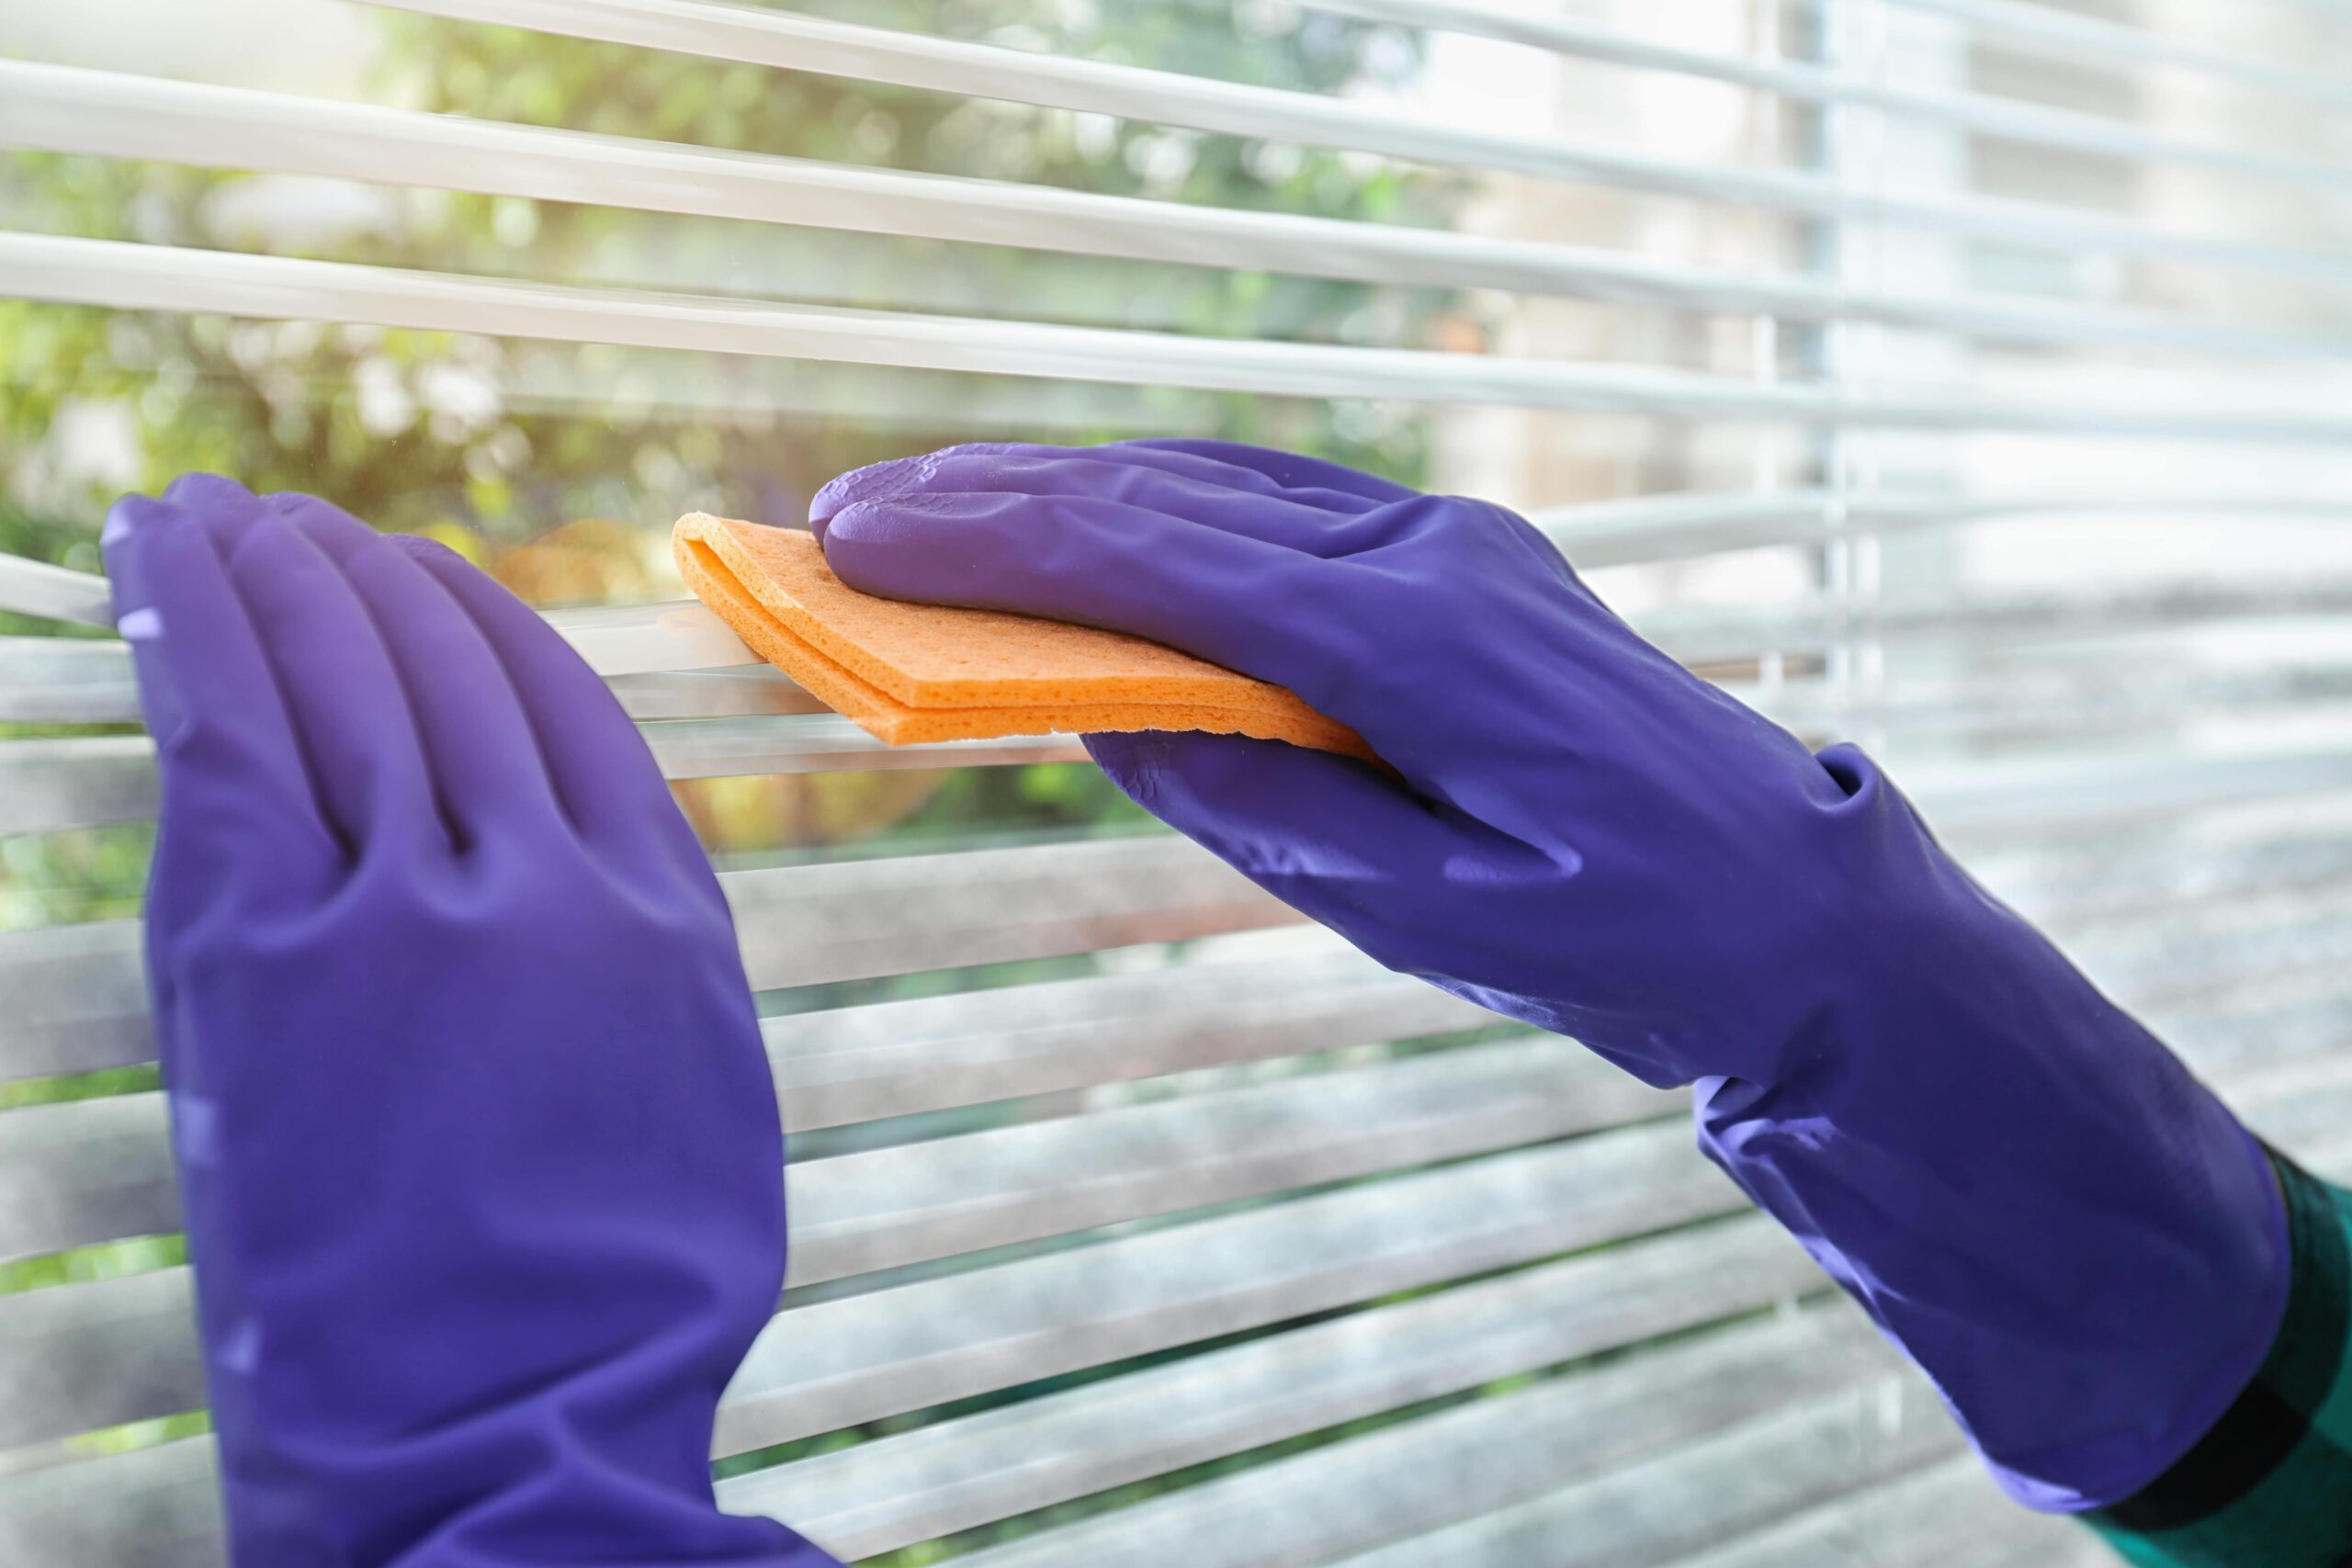 How To Clean Vinyl Blinds Easily